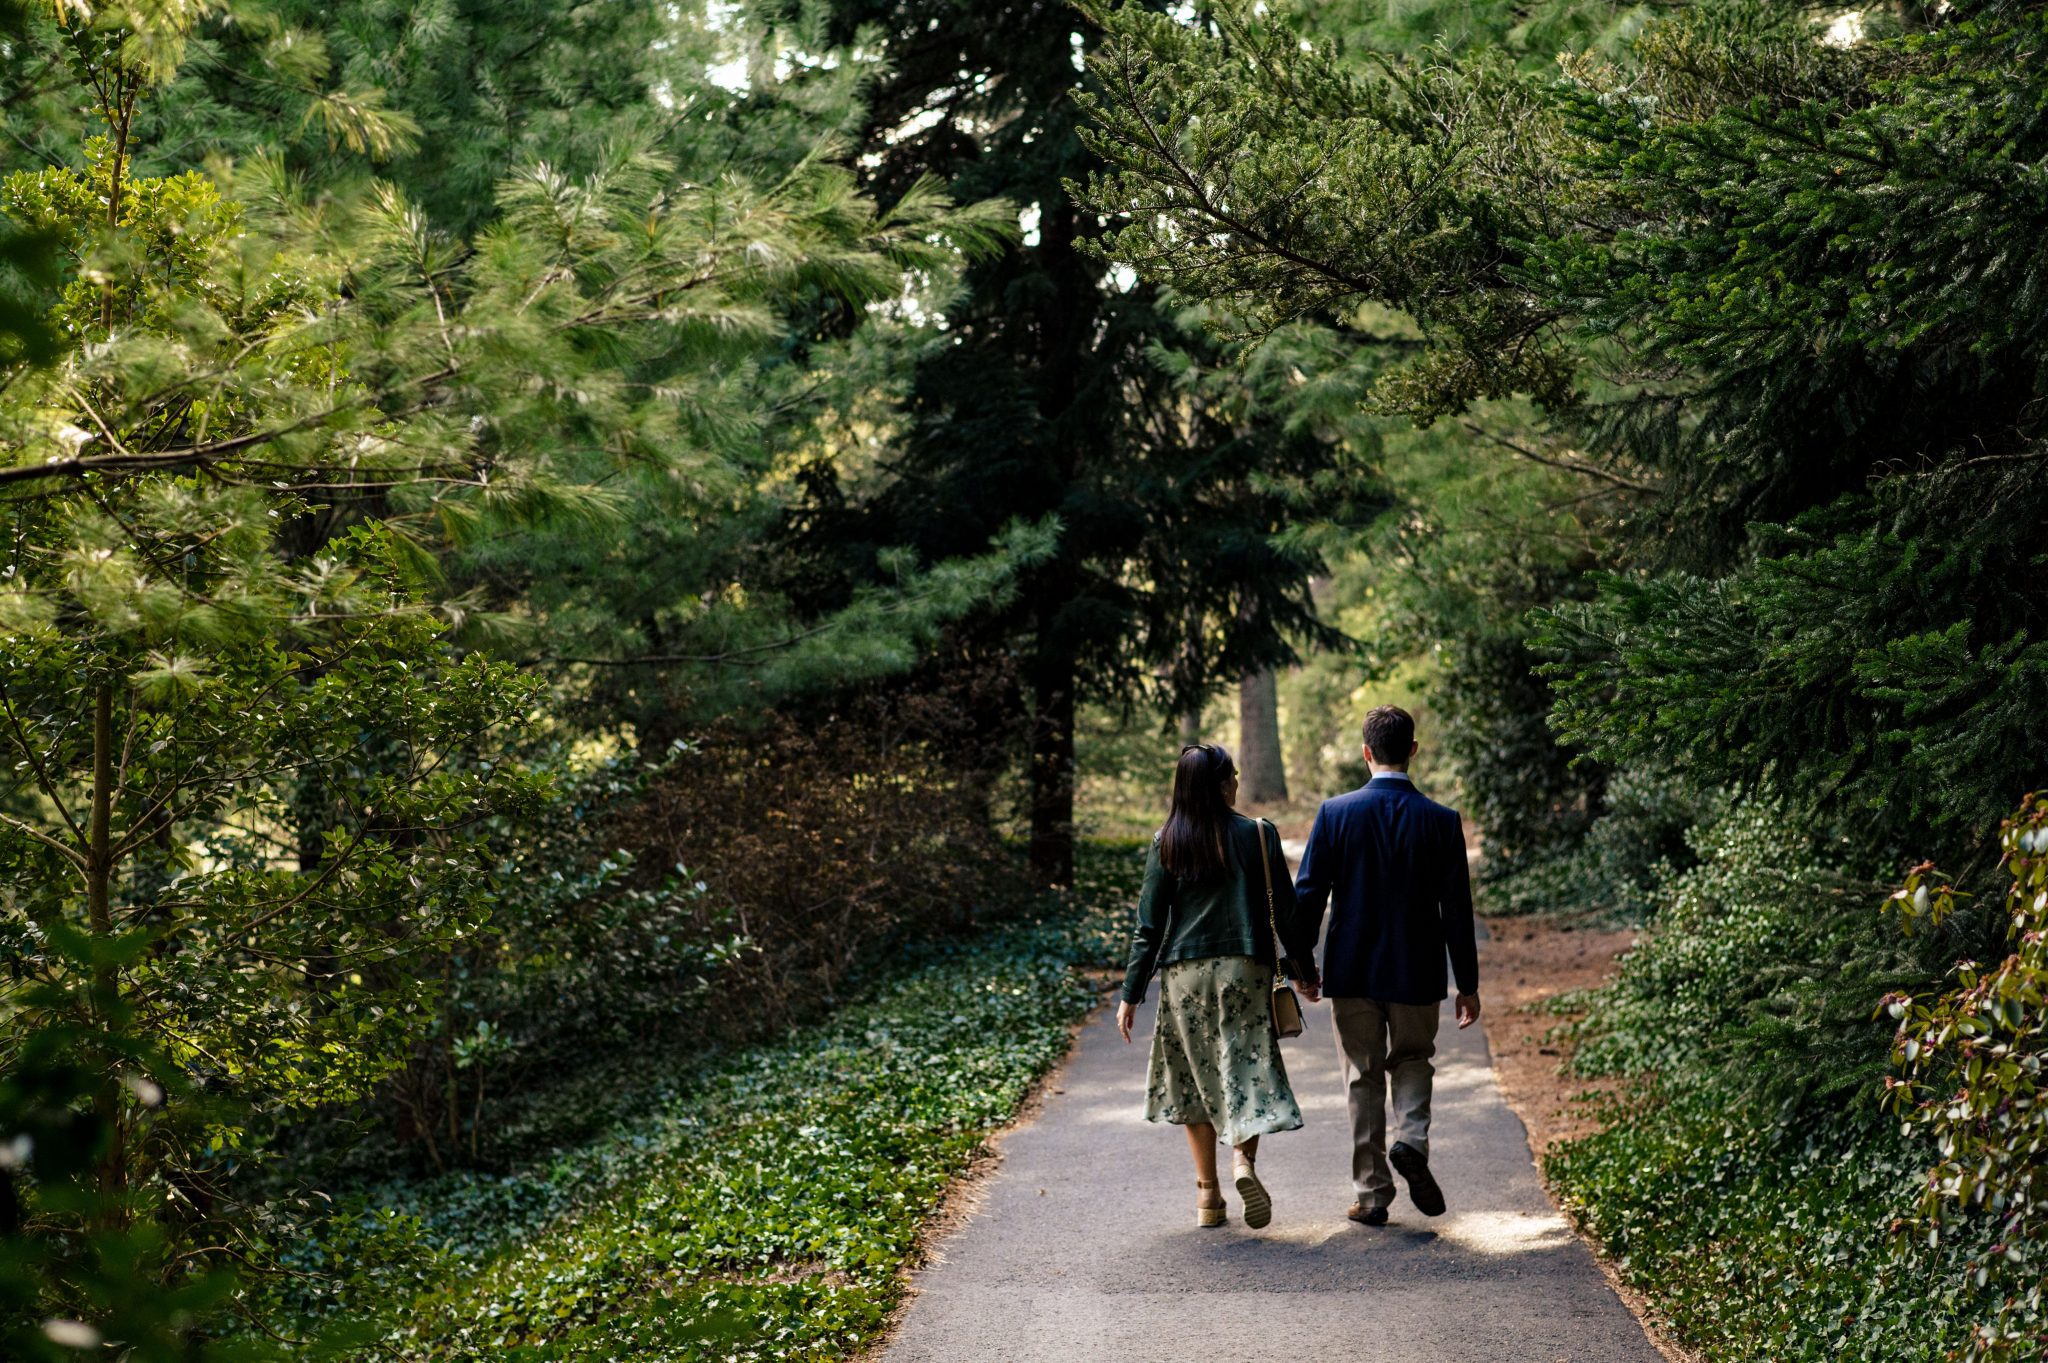 A couple's engagement photoshoot in the picturesque woods of Asheville, captured by a professional photographer.